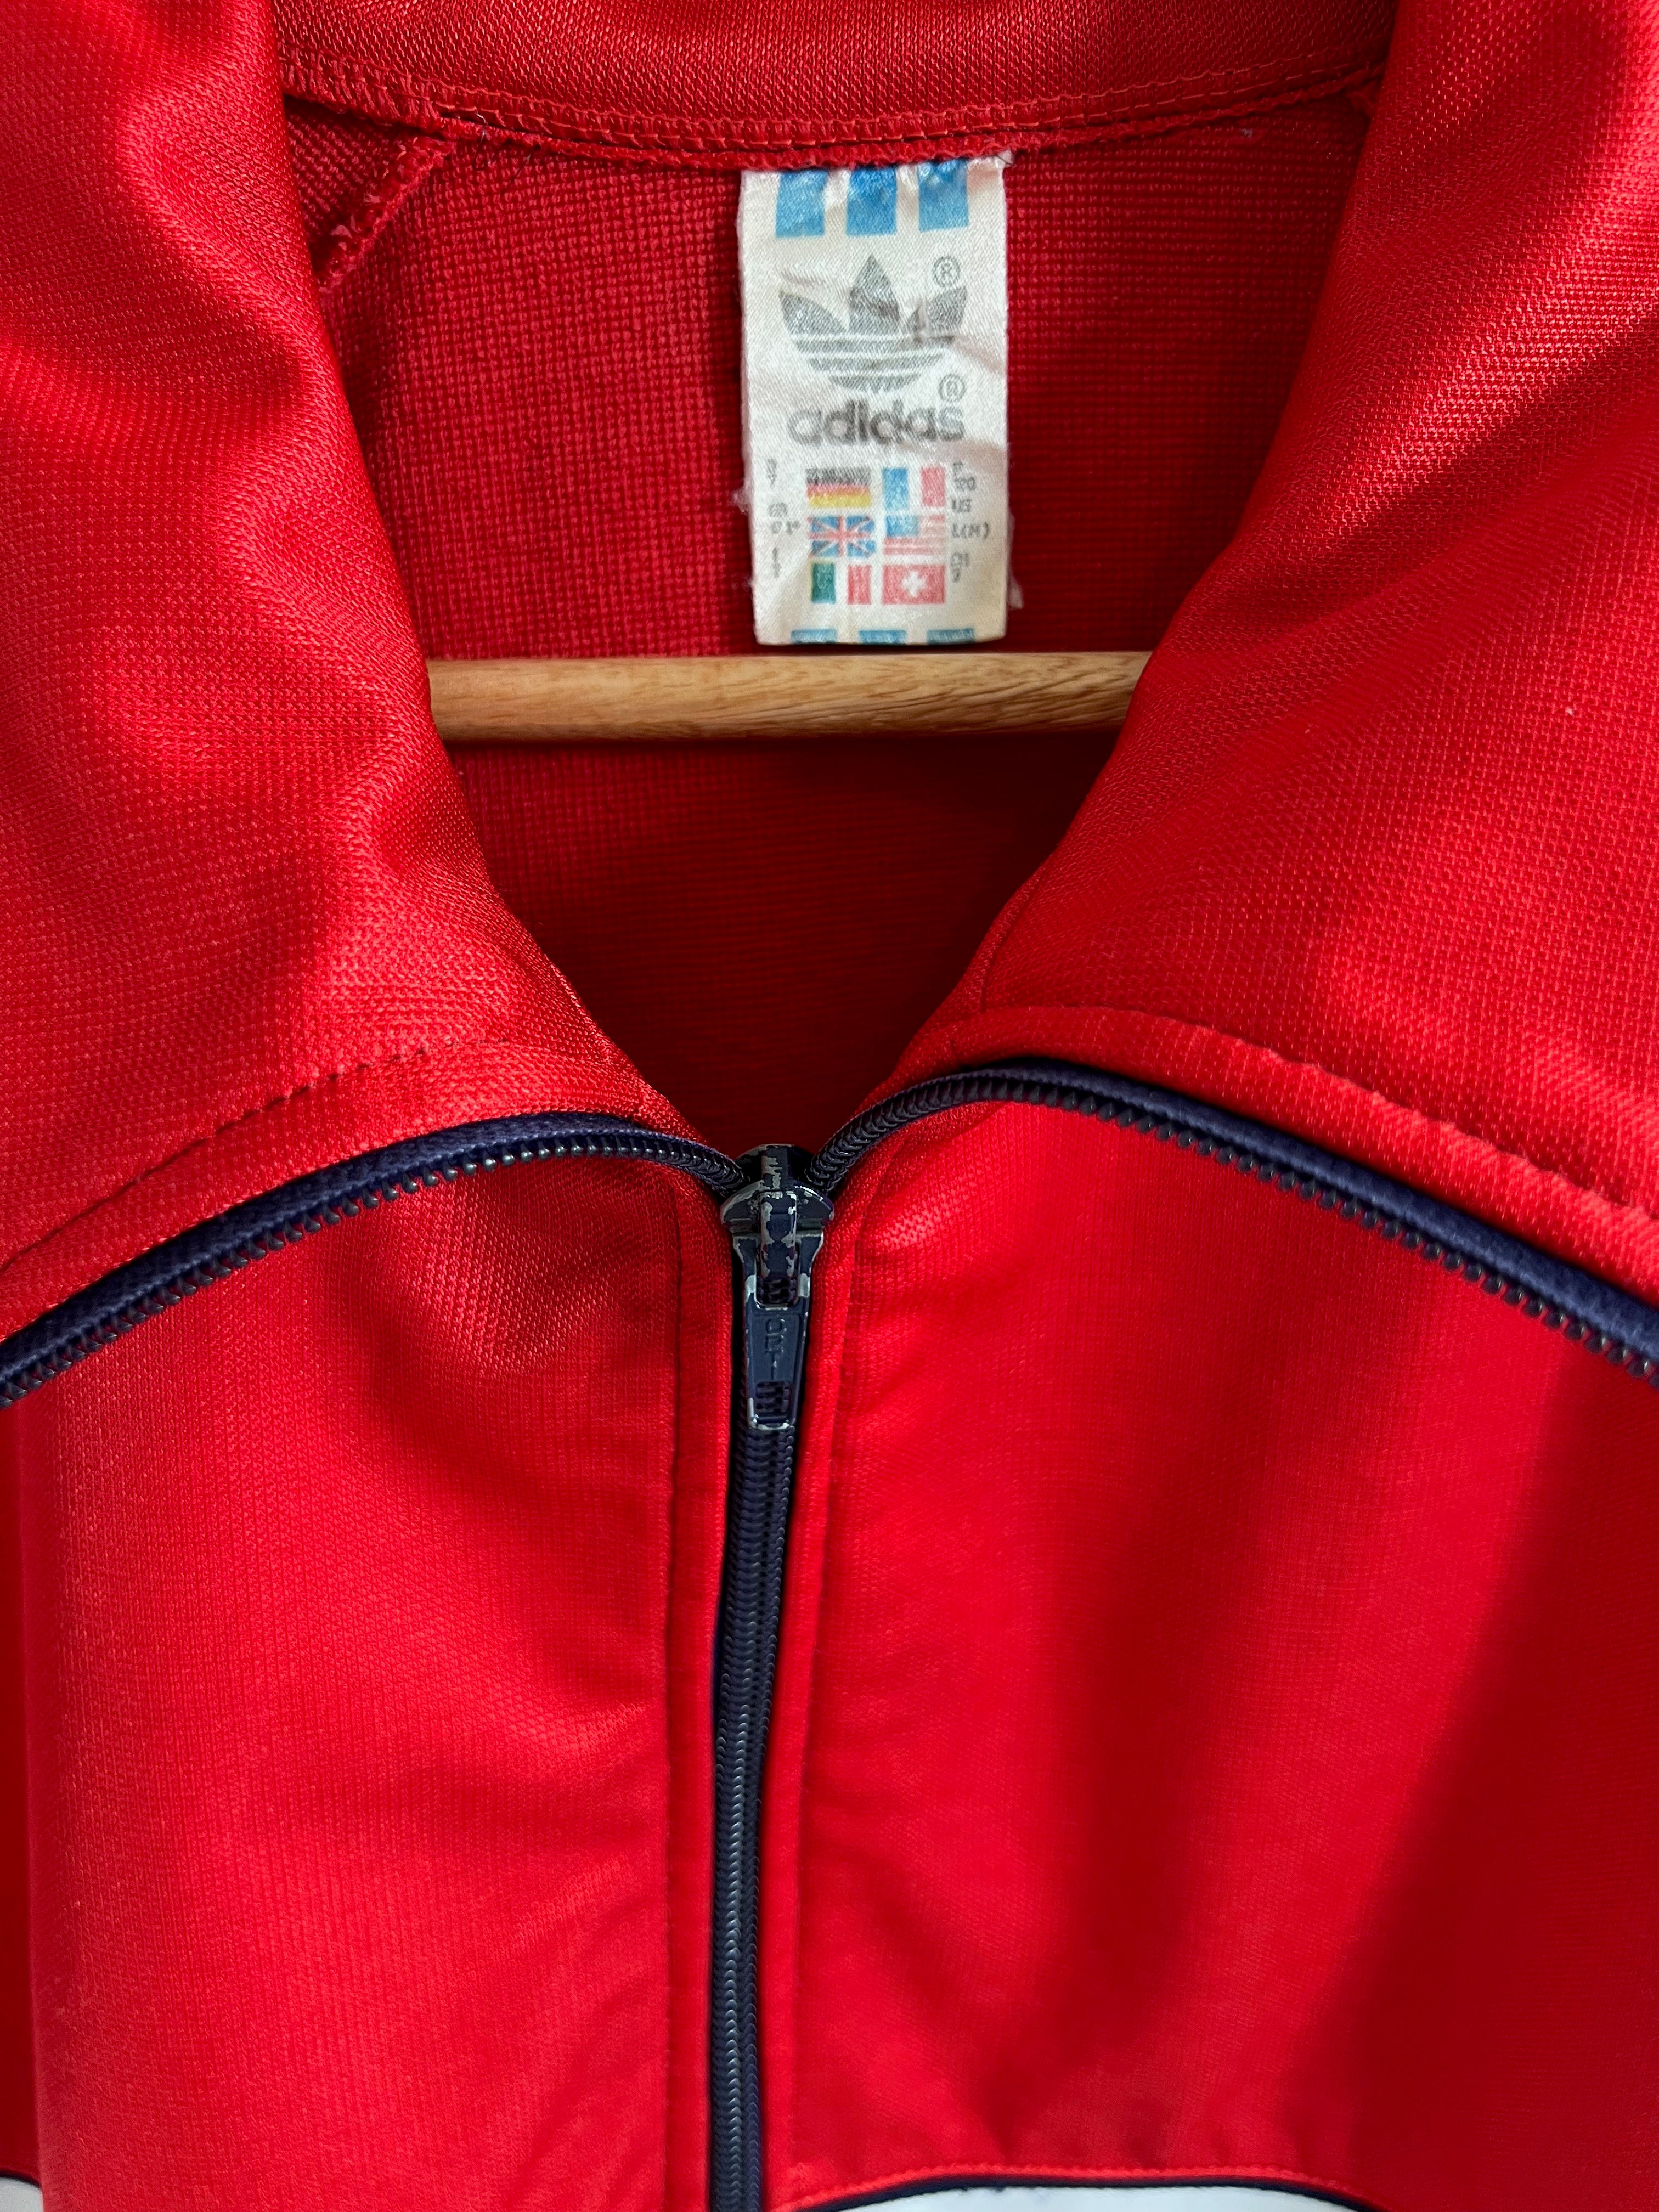 Vintage 80's 90's Adidas Track Jacket. Red, Blue and white